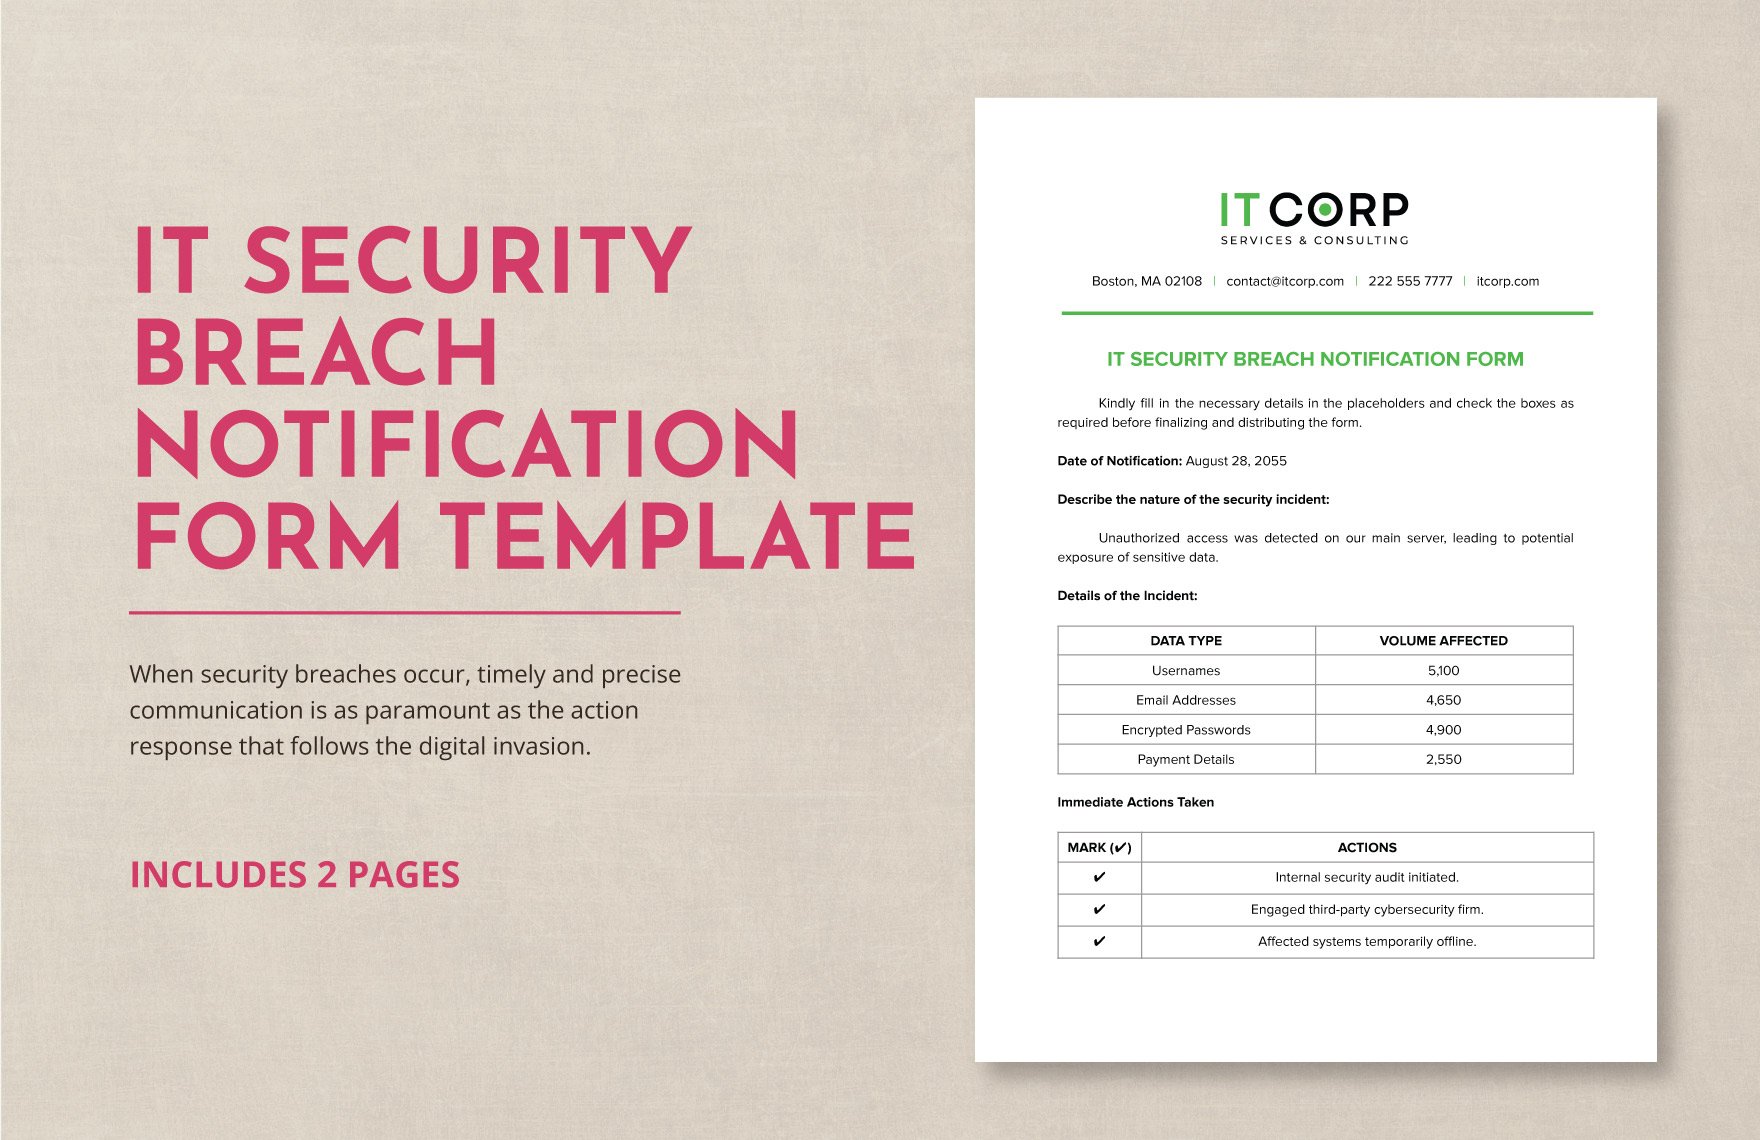 IT Security Breach Notification Form Template in Word, Google Docs, PDF